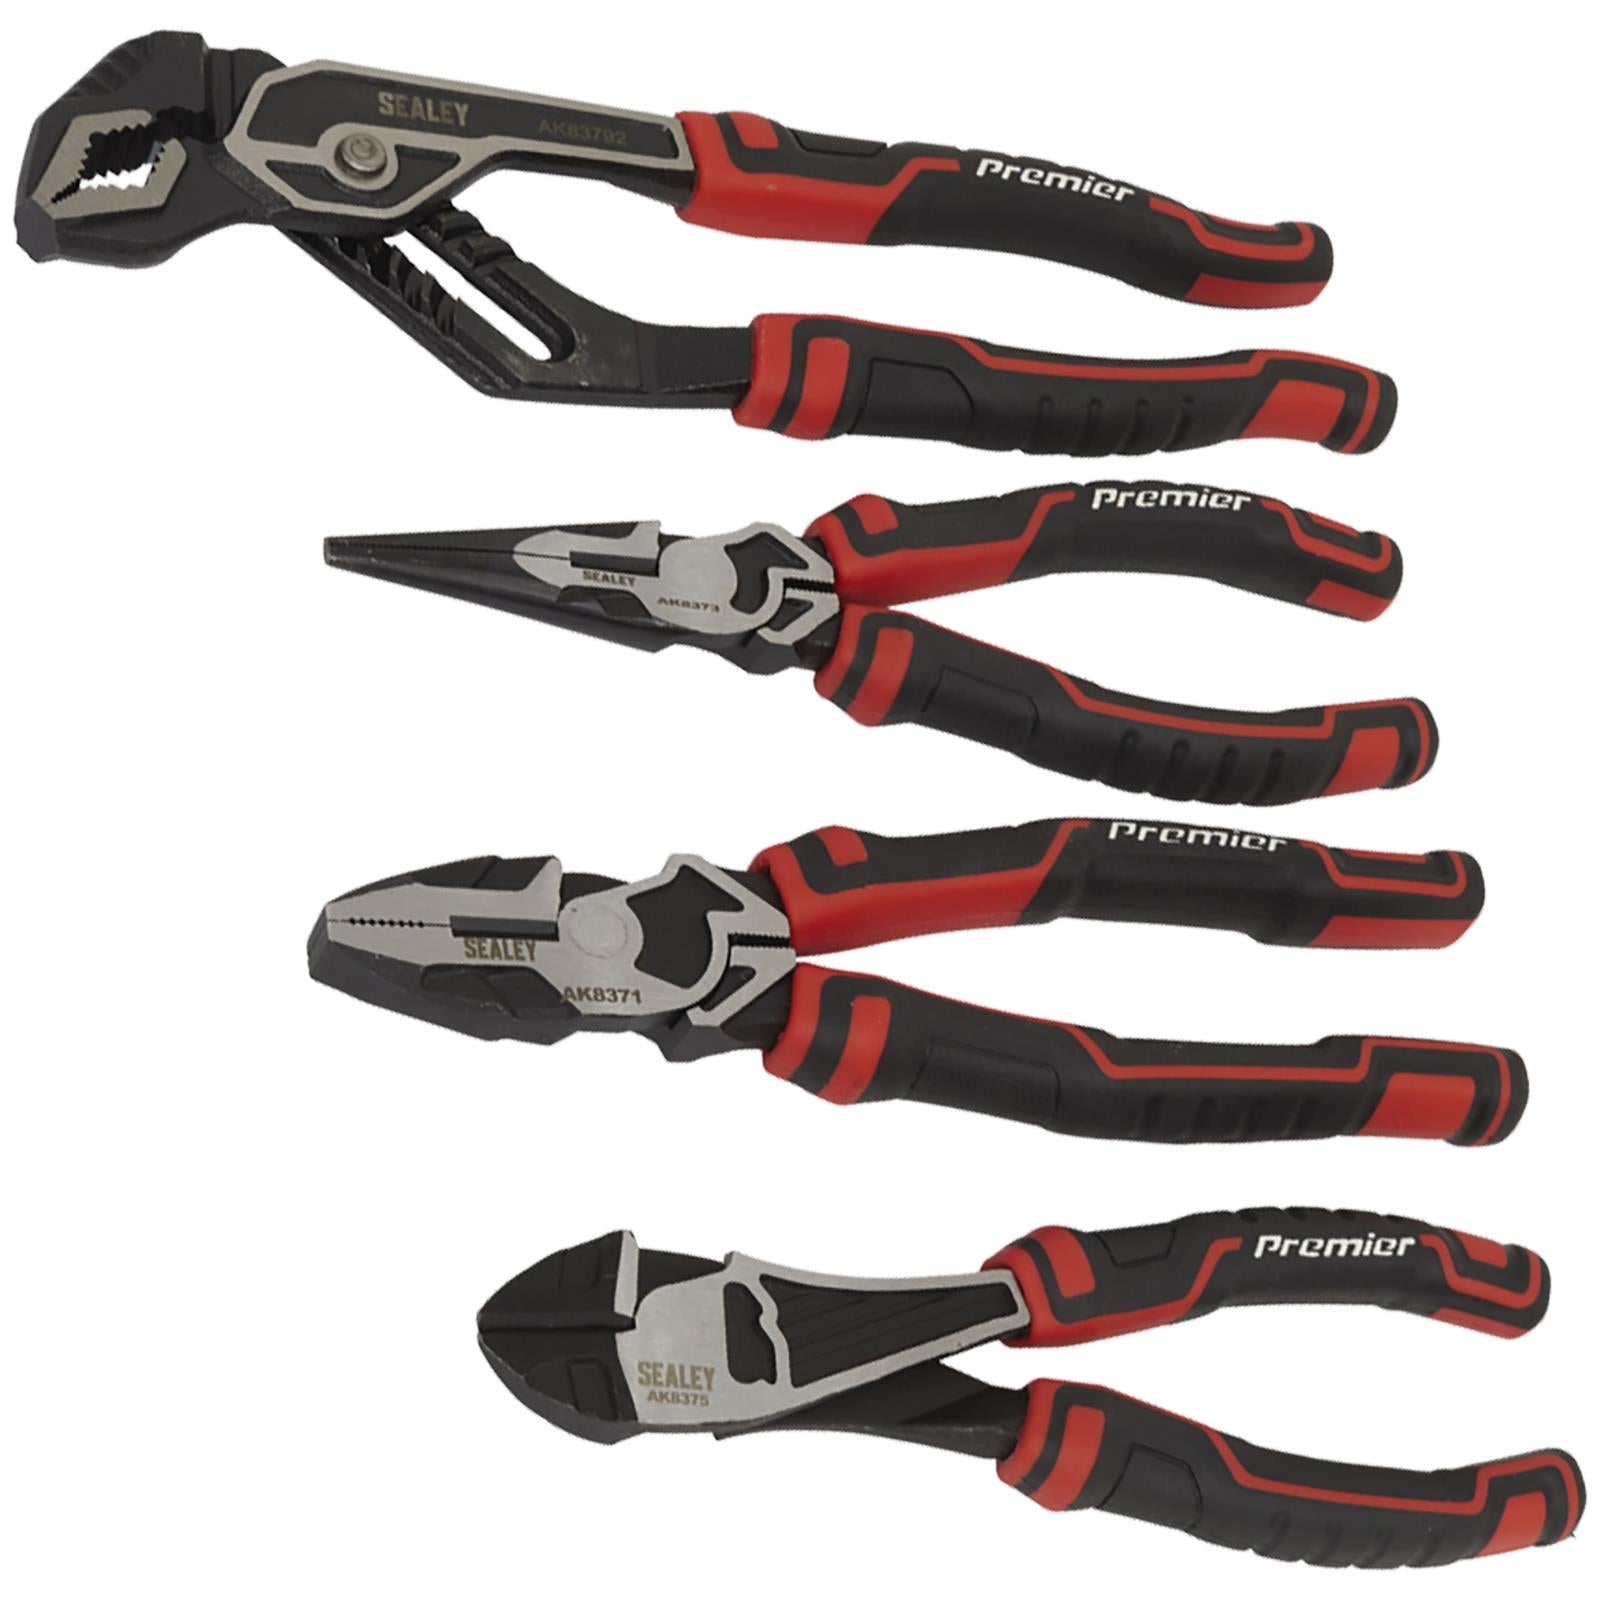 Sealey Pliers Set High Leverage 4 Piece Side Cutters Combination Long Nose Water Pump